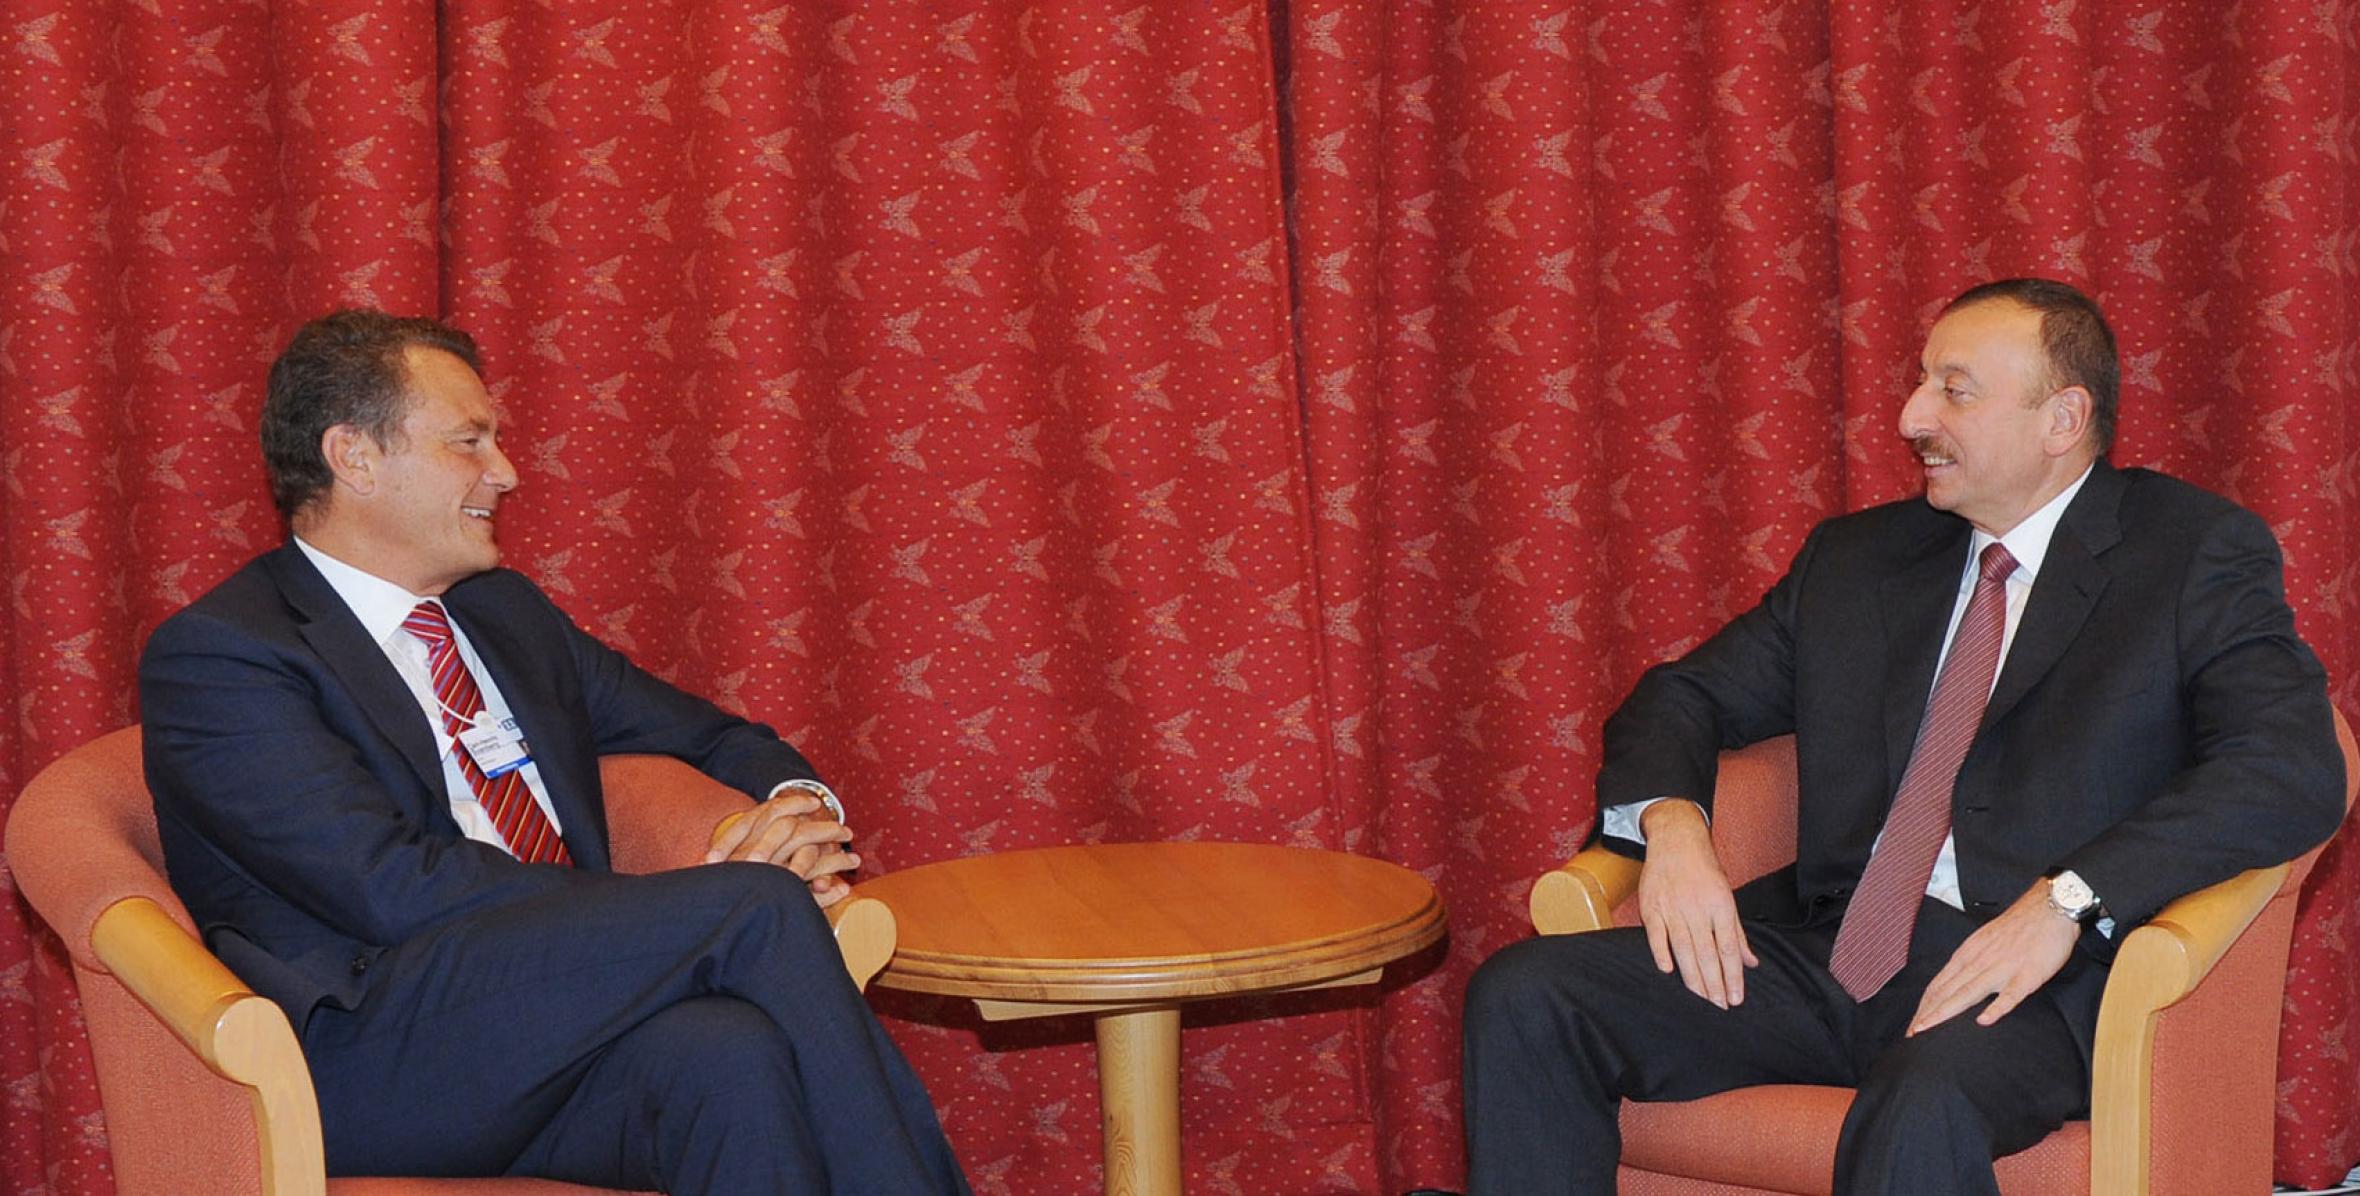 Ilham Aliyev met with Board Chairman and Non-Executive Director of BP, Carl-Henric Svanberg